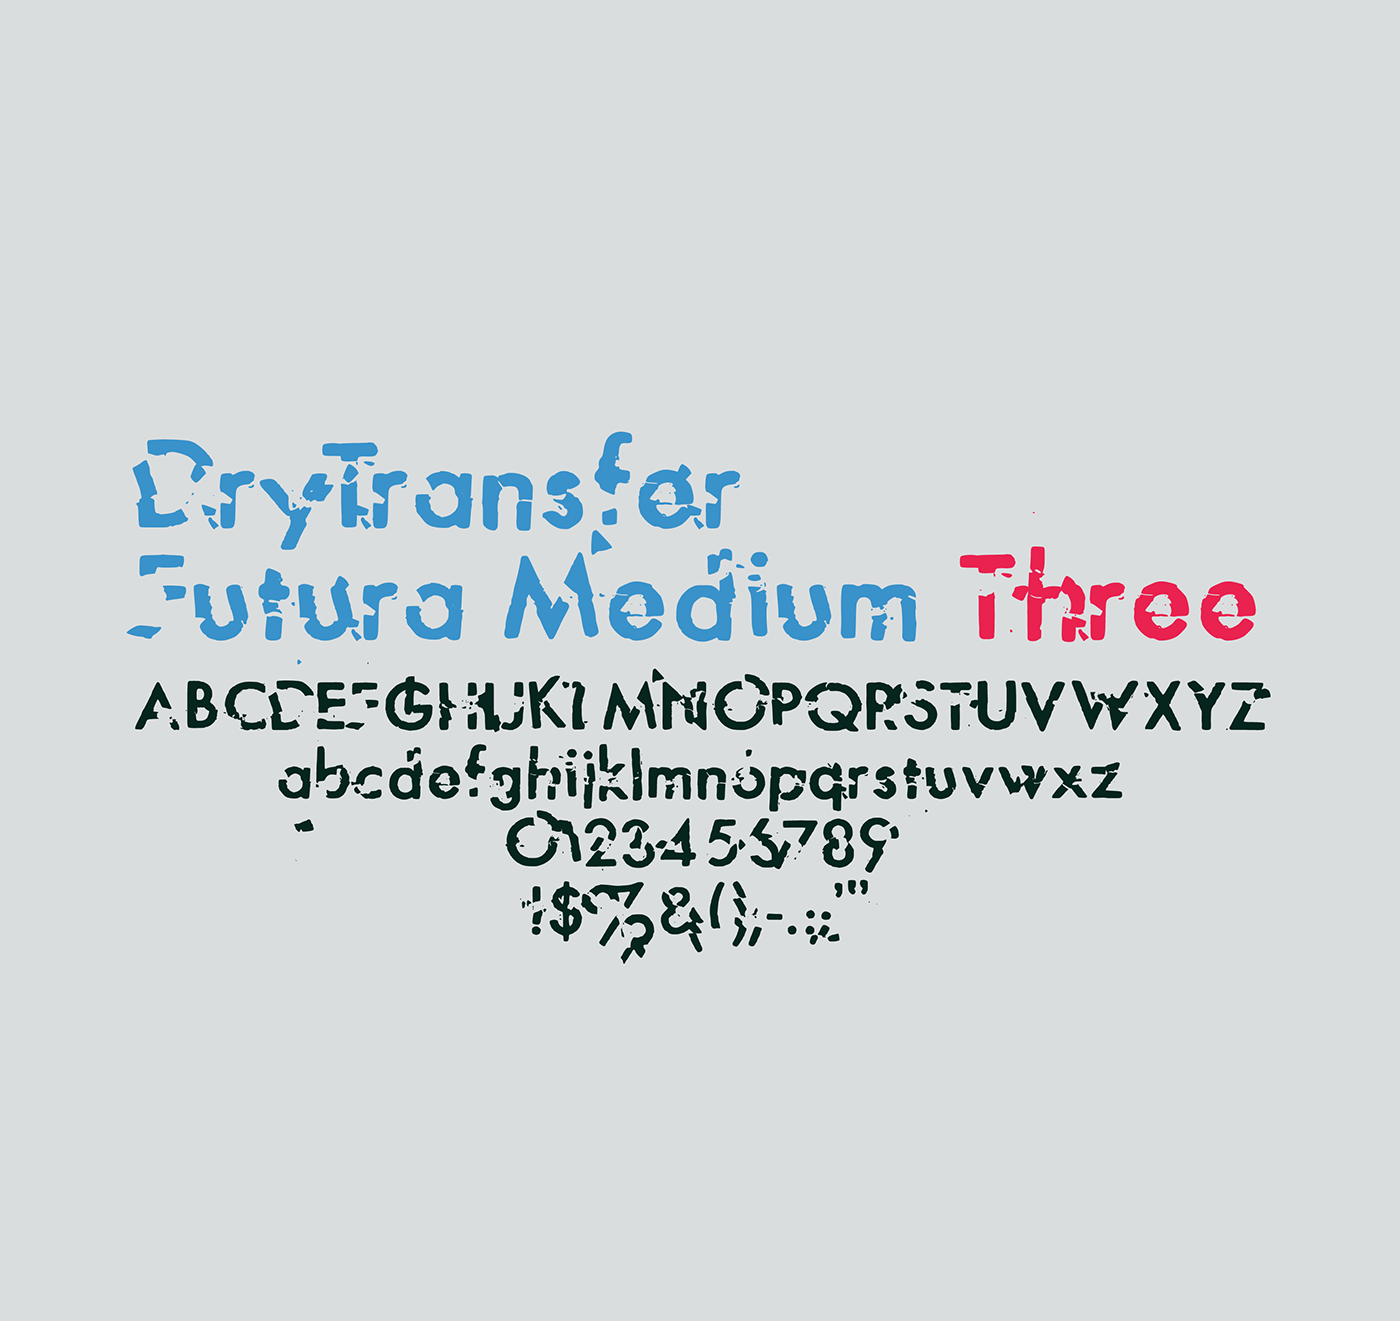 free Free font type Typeface letraset dry transfer Distressed